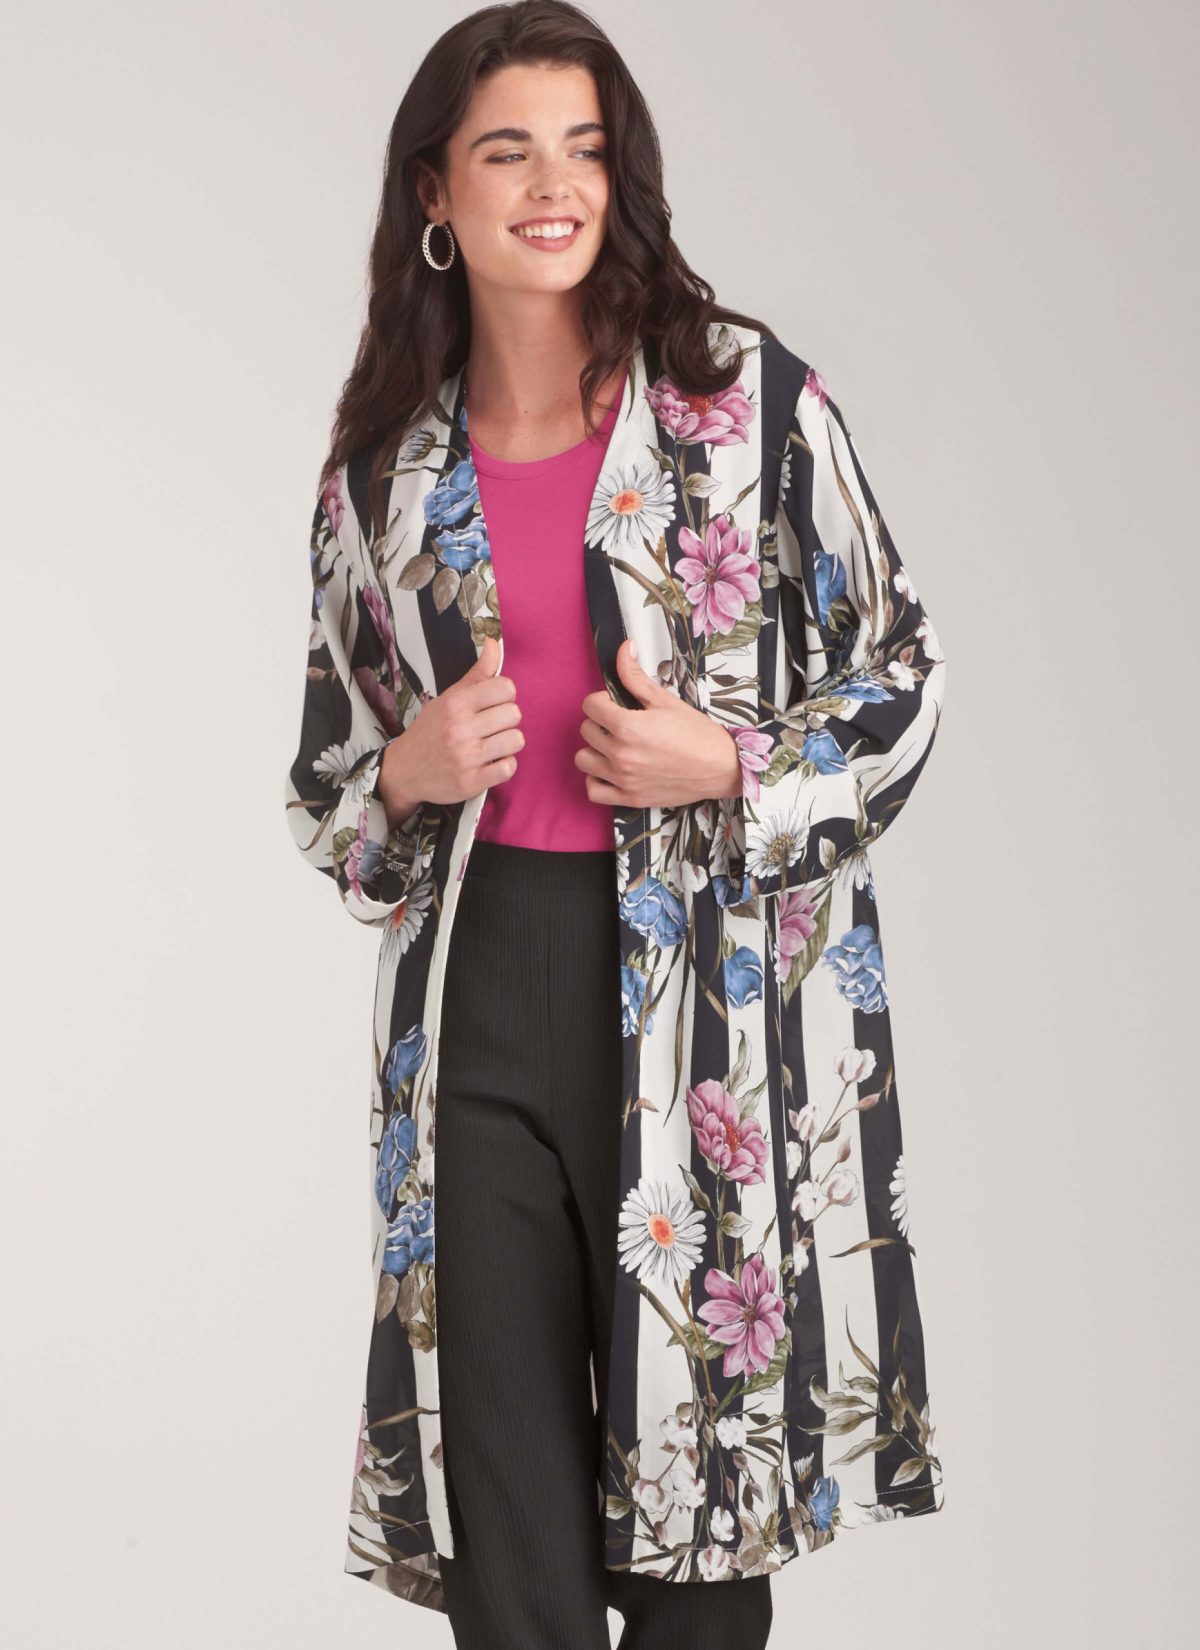 New Look Sewing Pattern N6770 Misses' Jacket and Trousers